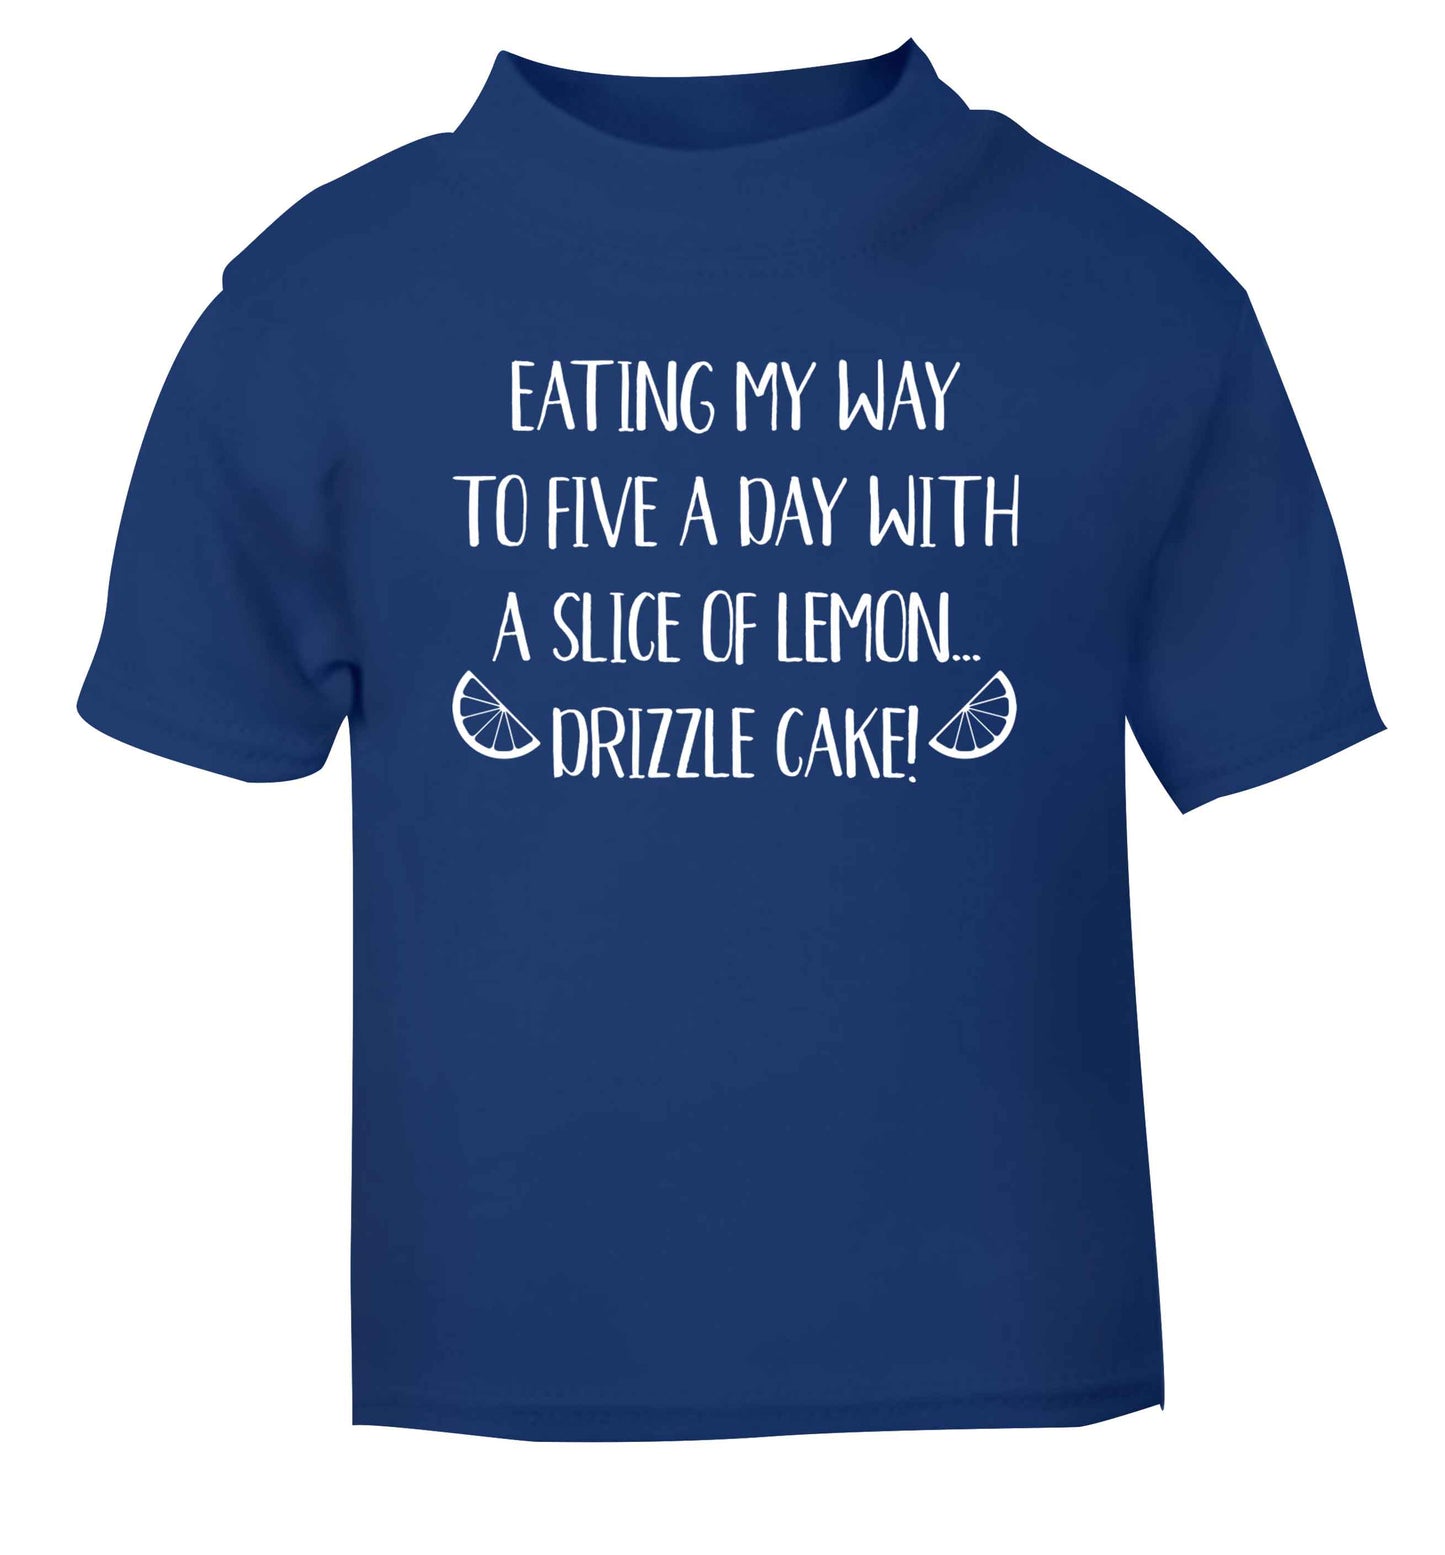 Eating my way to five a day with a slice of lemon drizzle cake day blue Baby Toddler Tshirt 2 Years